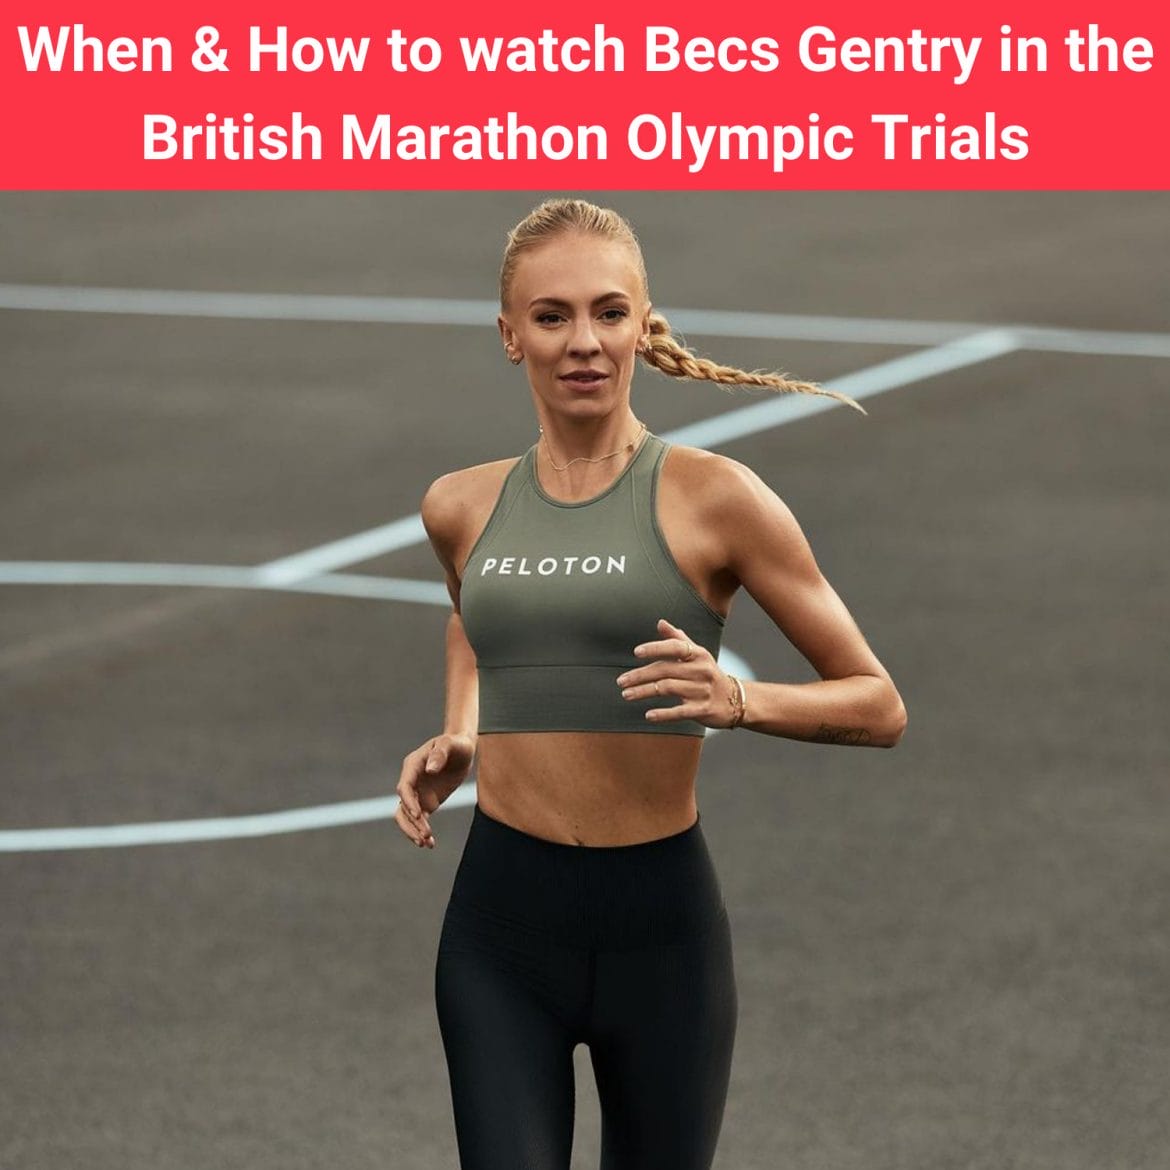 Peloton Coach Becs Gentry Results in the UK Olympic Marathon Trials